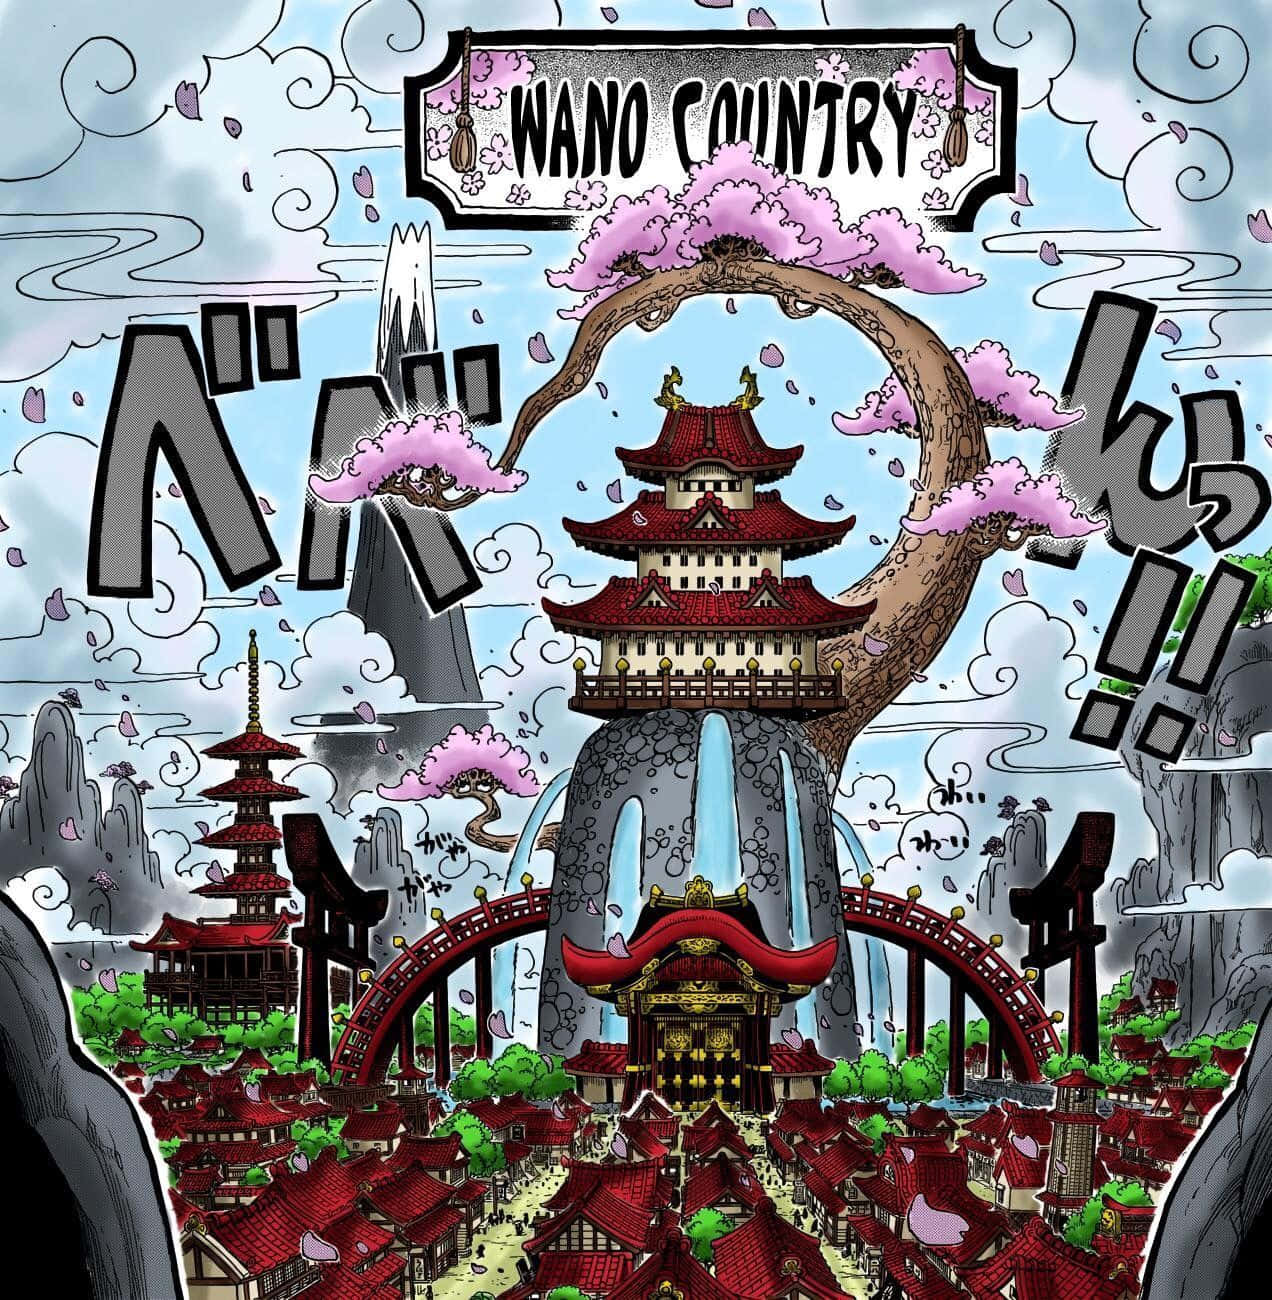 Step into the world of the Wano Country Wallpaper